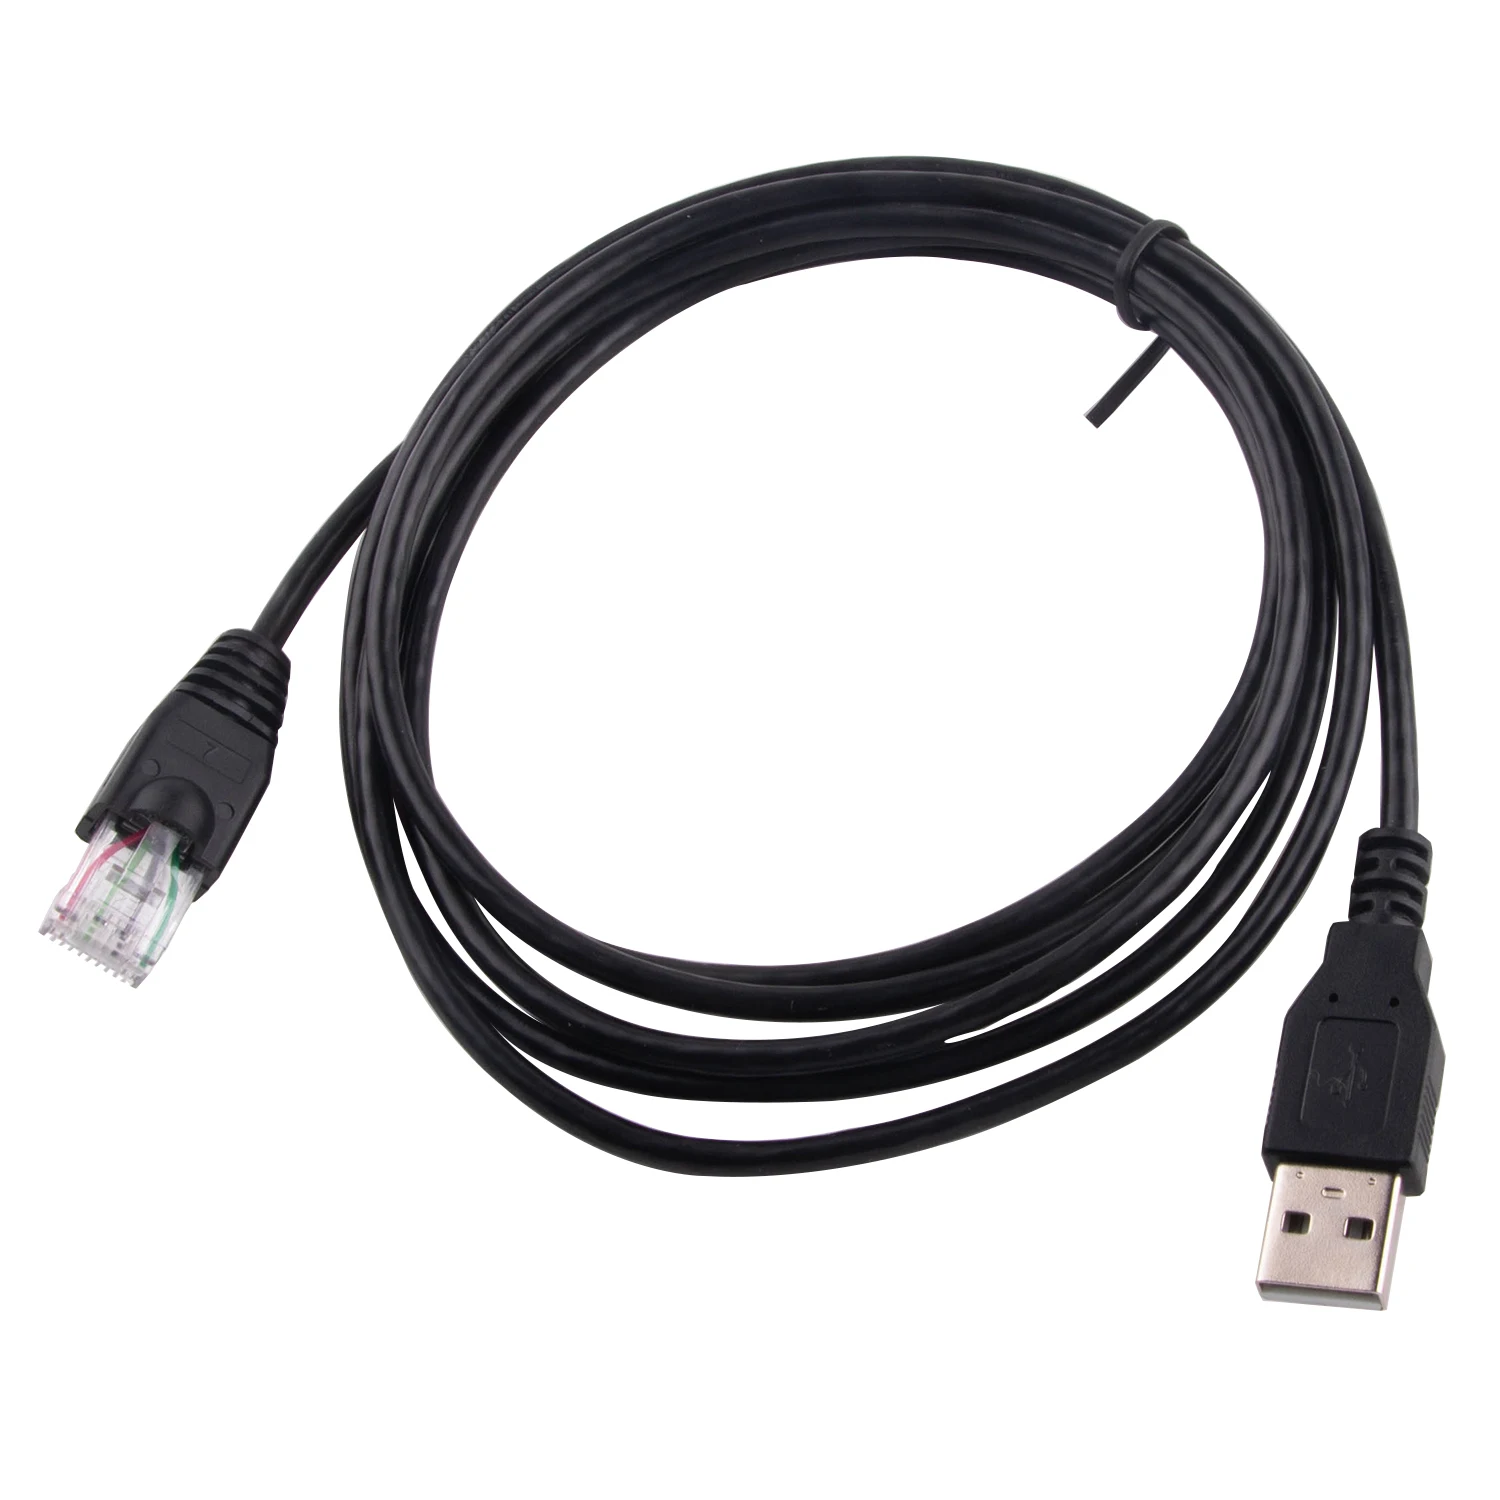 UPS USB Cable AP9827 940-0127B 6 Ft with Molded Strain Relief Boot 